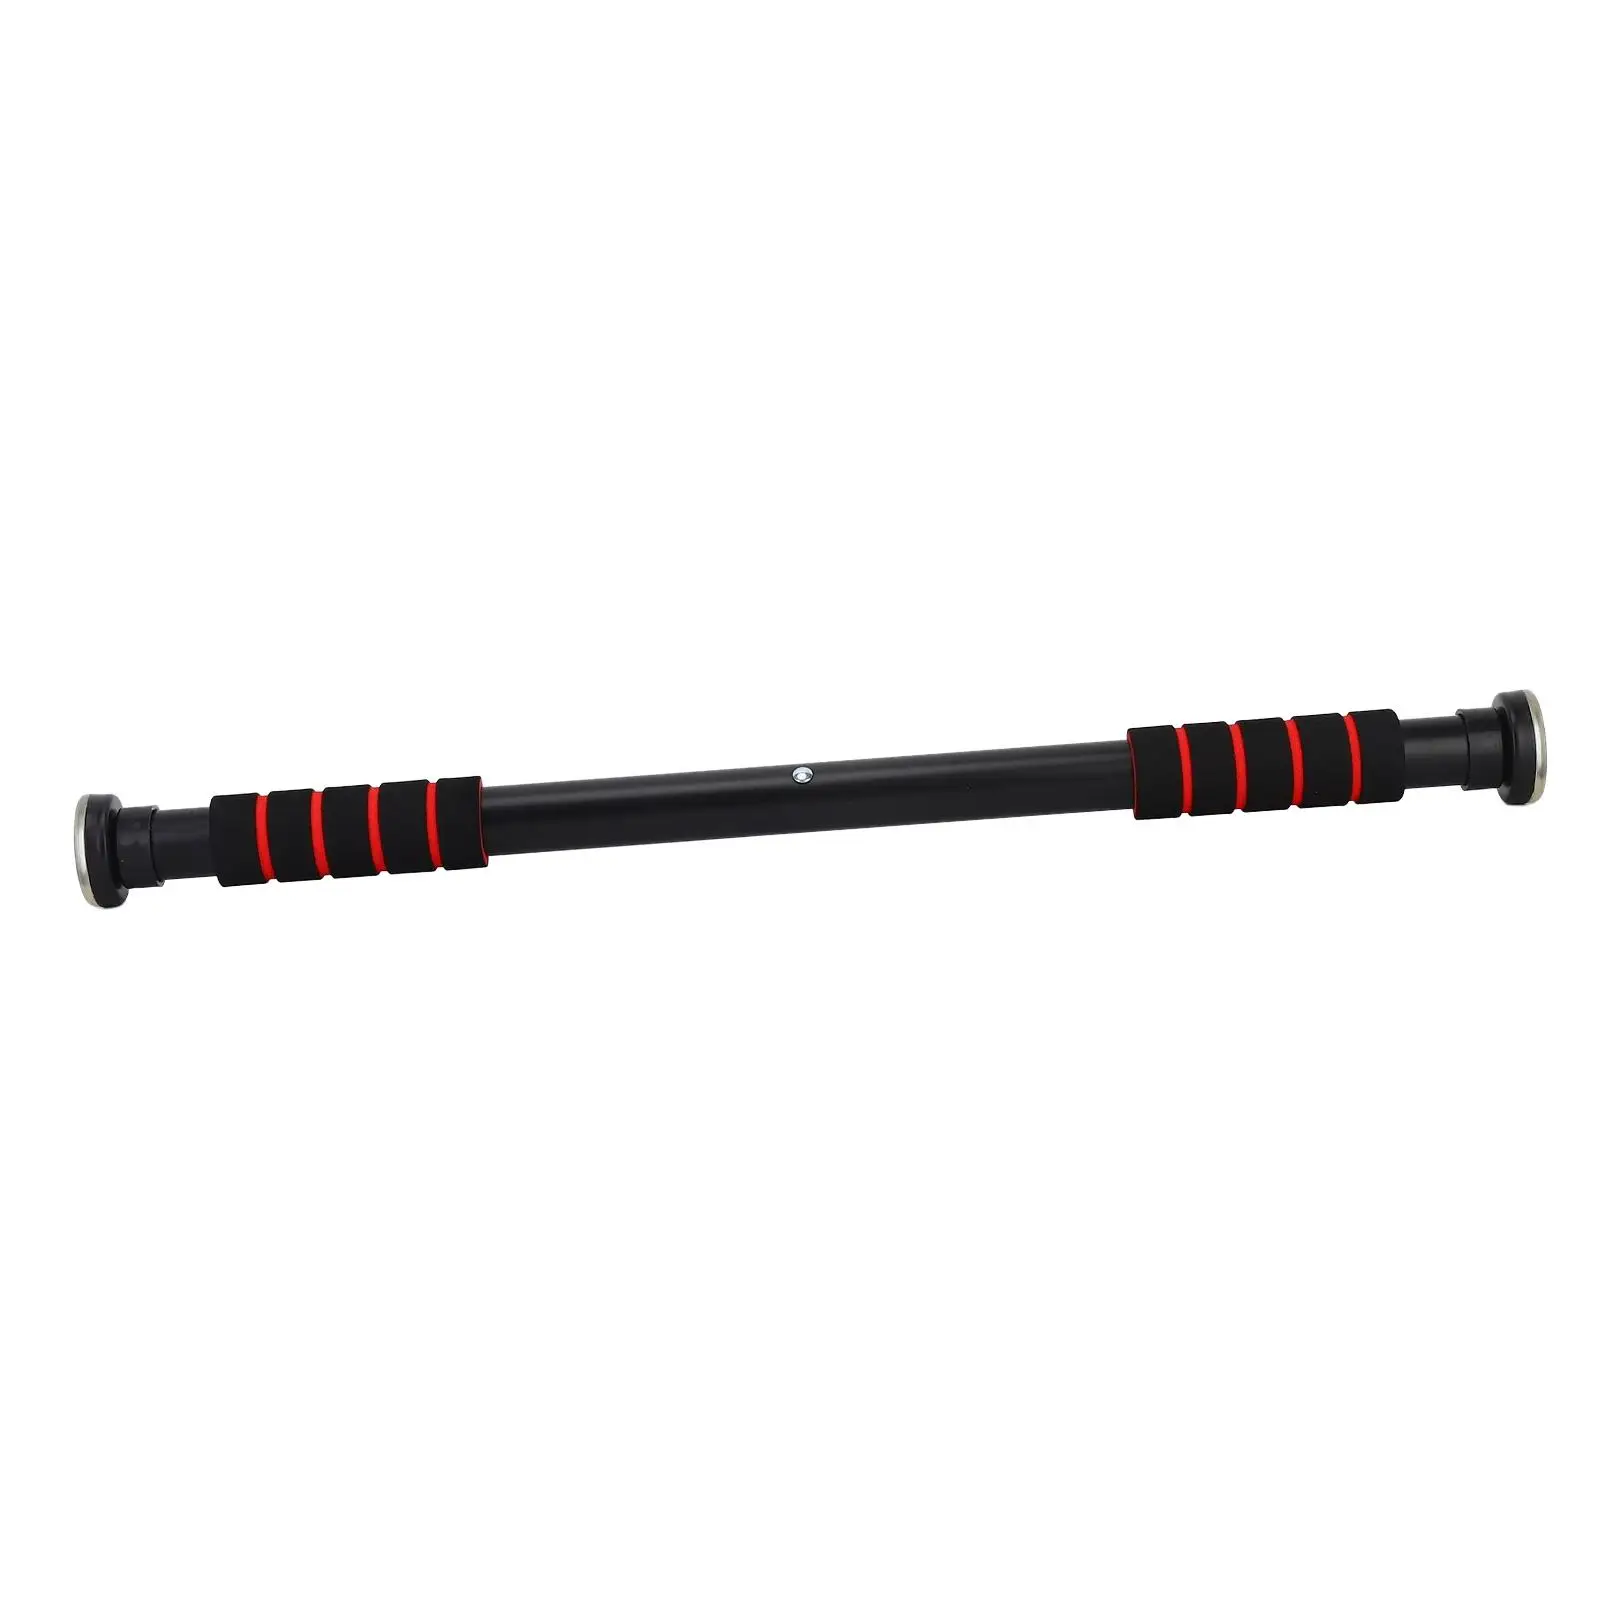 Chin up Bar Training Equipment Fitness Exercise Bar Pull up Bar for Doorway